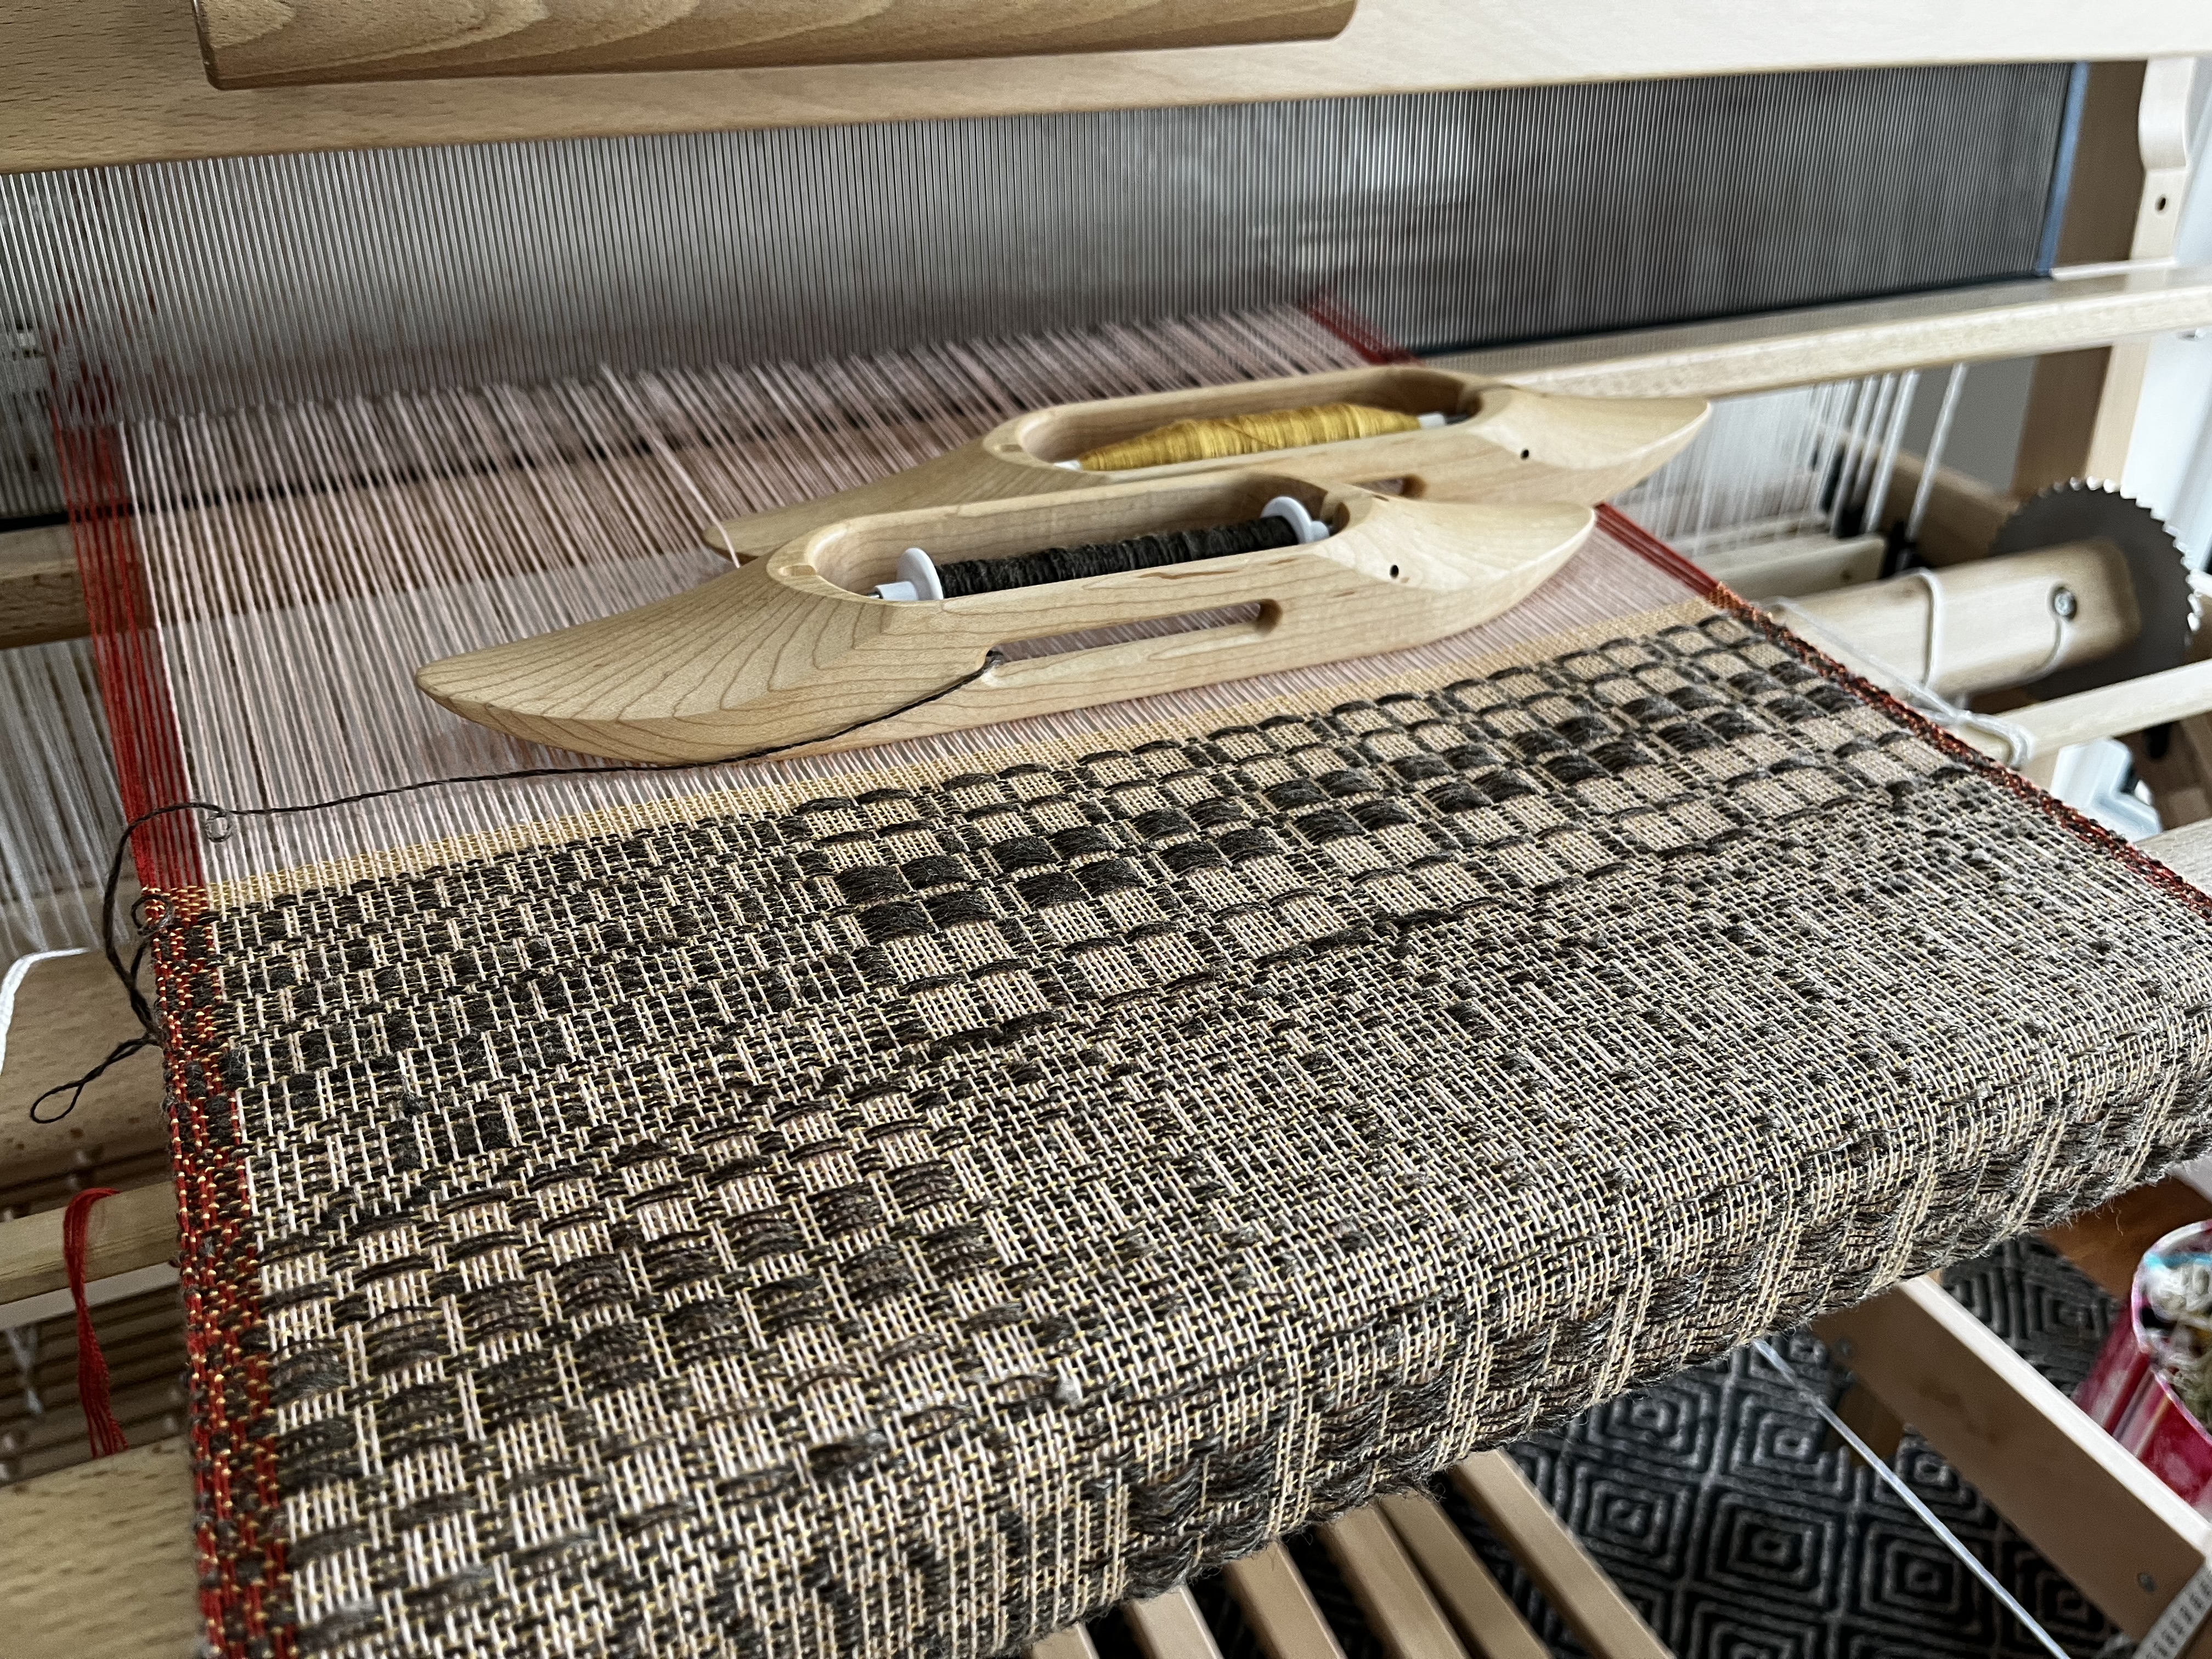 Spinning to weave